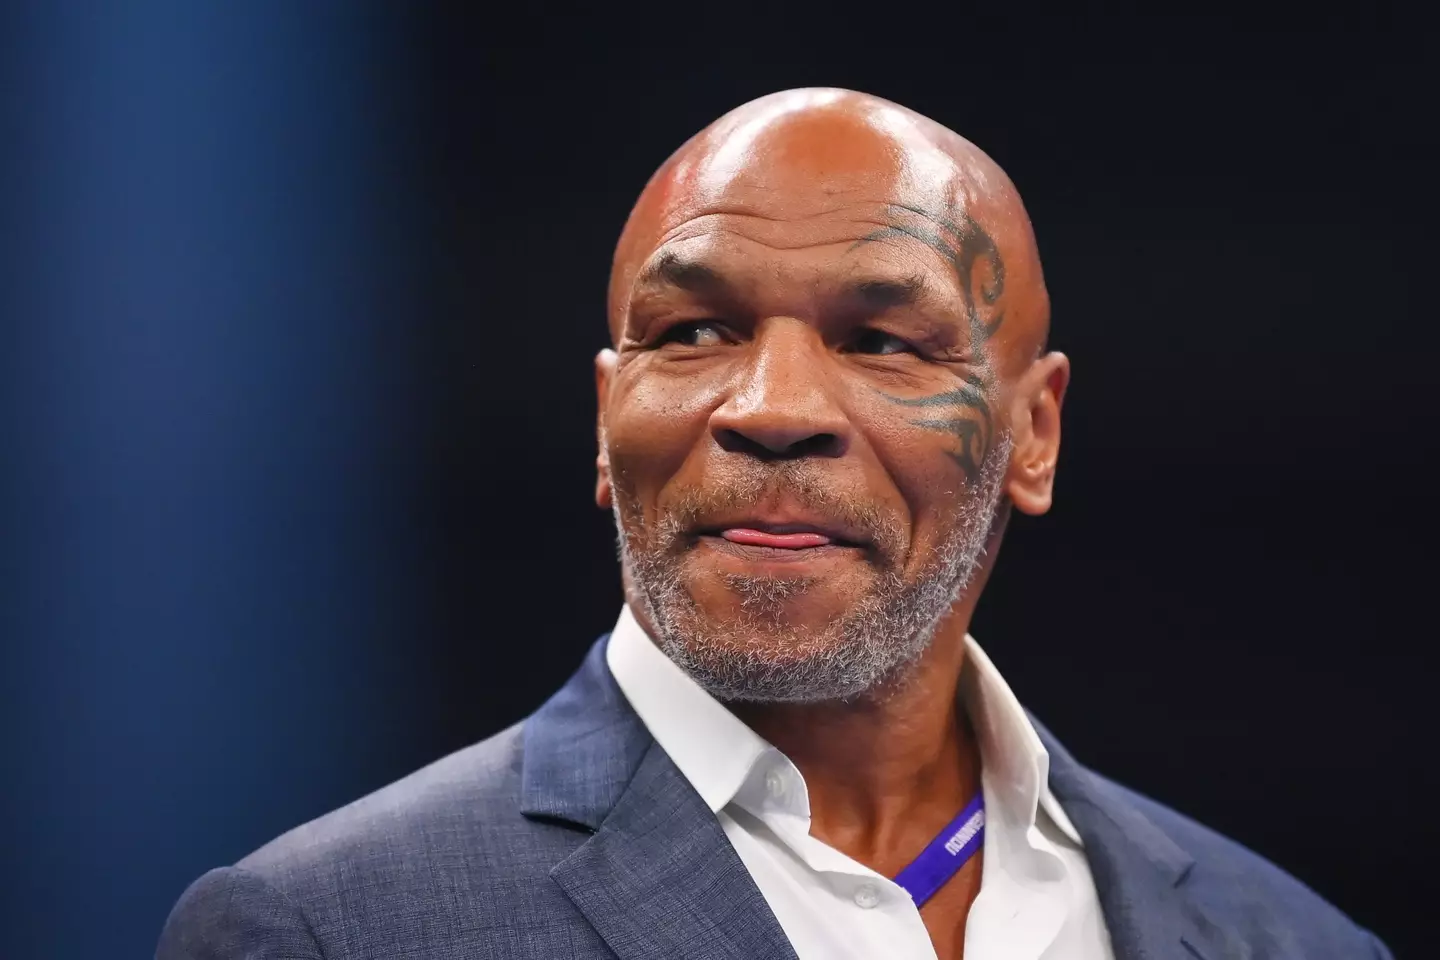 Mike Tyson announced his podcasting days are coming to an end.